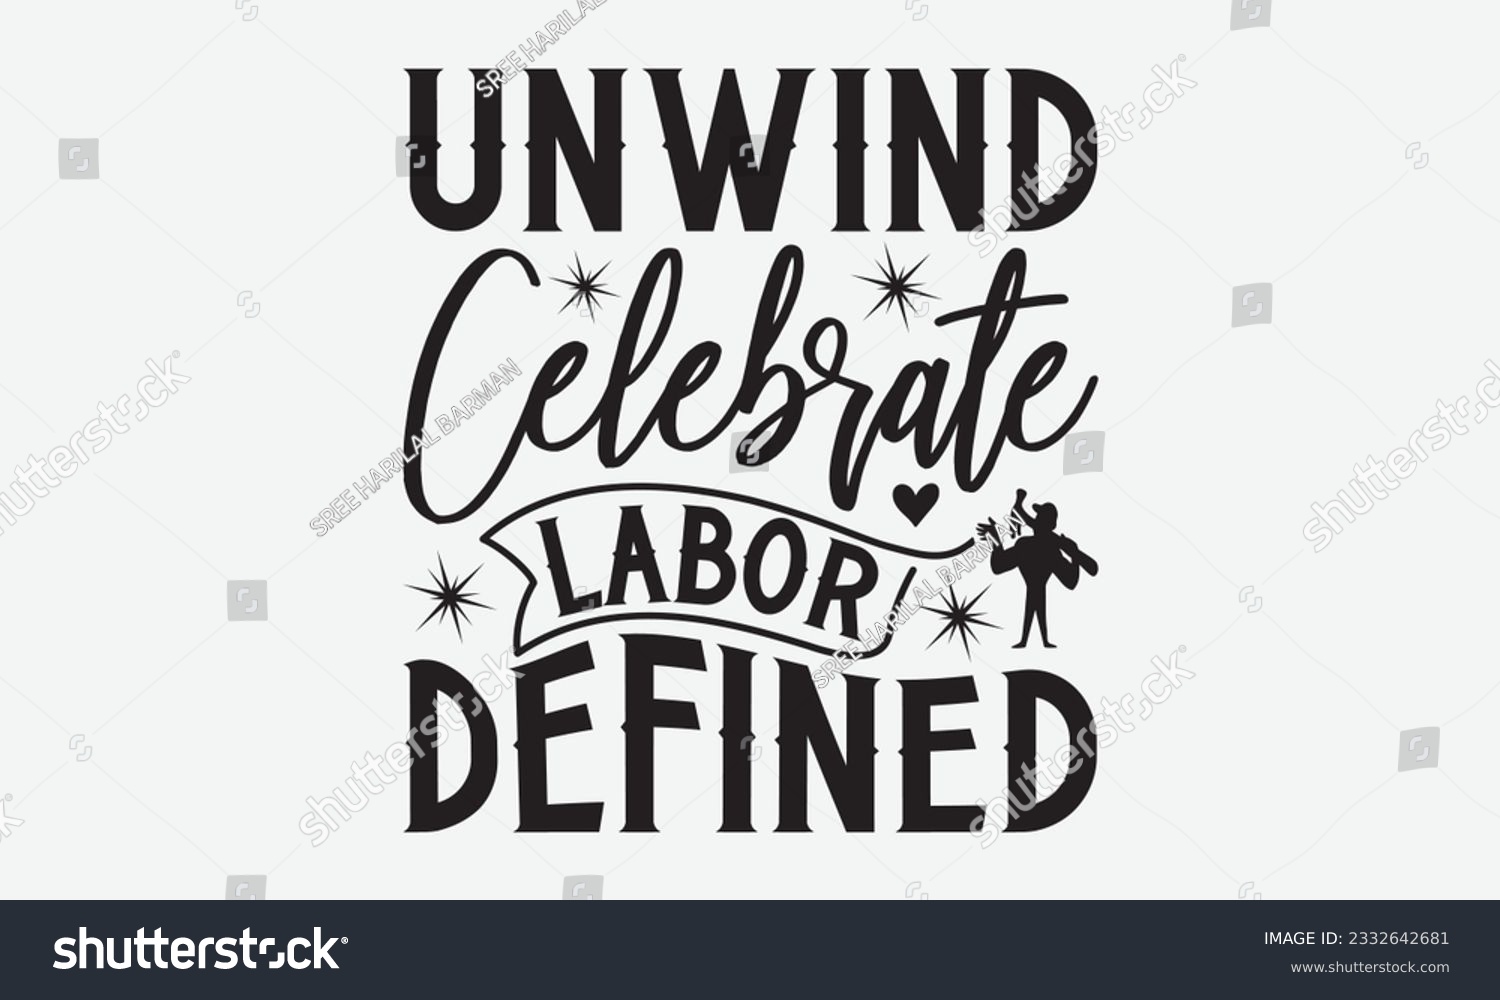 SVG of Unwind Celebrate Labor Defined - Labor svg typography t-shirt design. celebration in calligraphy text or font Labor in the Middle East. Greeting cards, templates, and mugs. EPS 10. svg